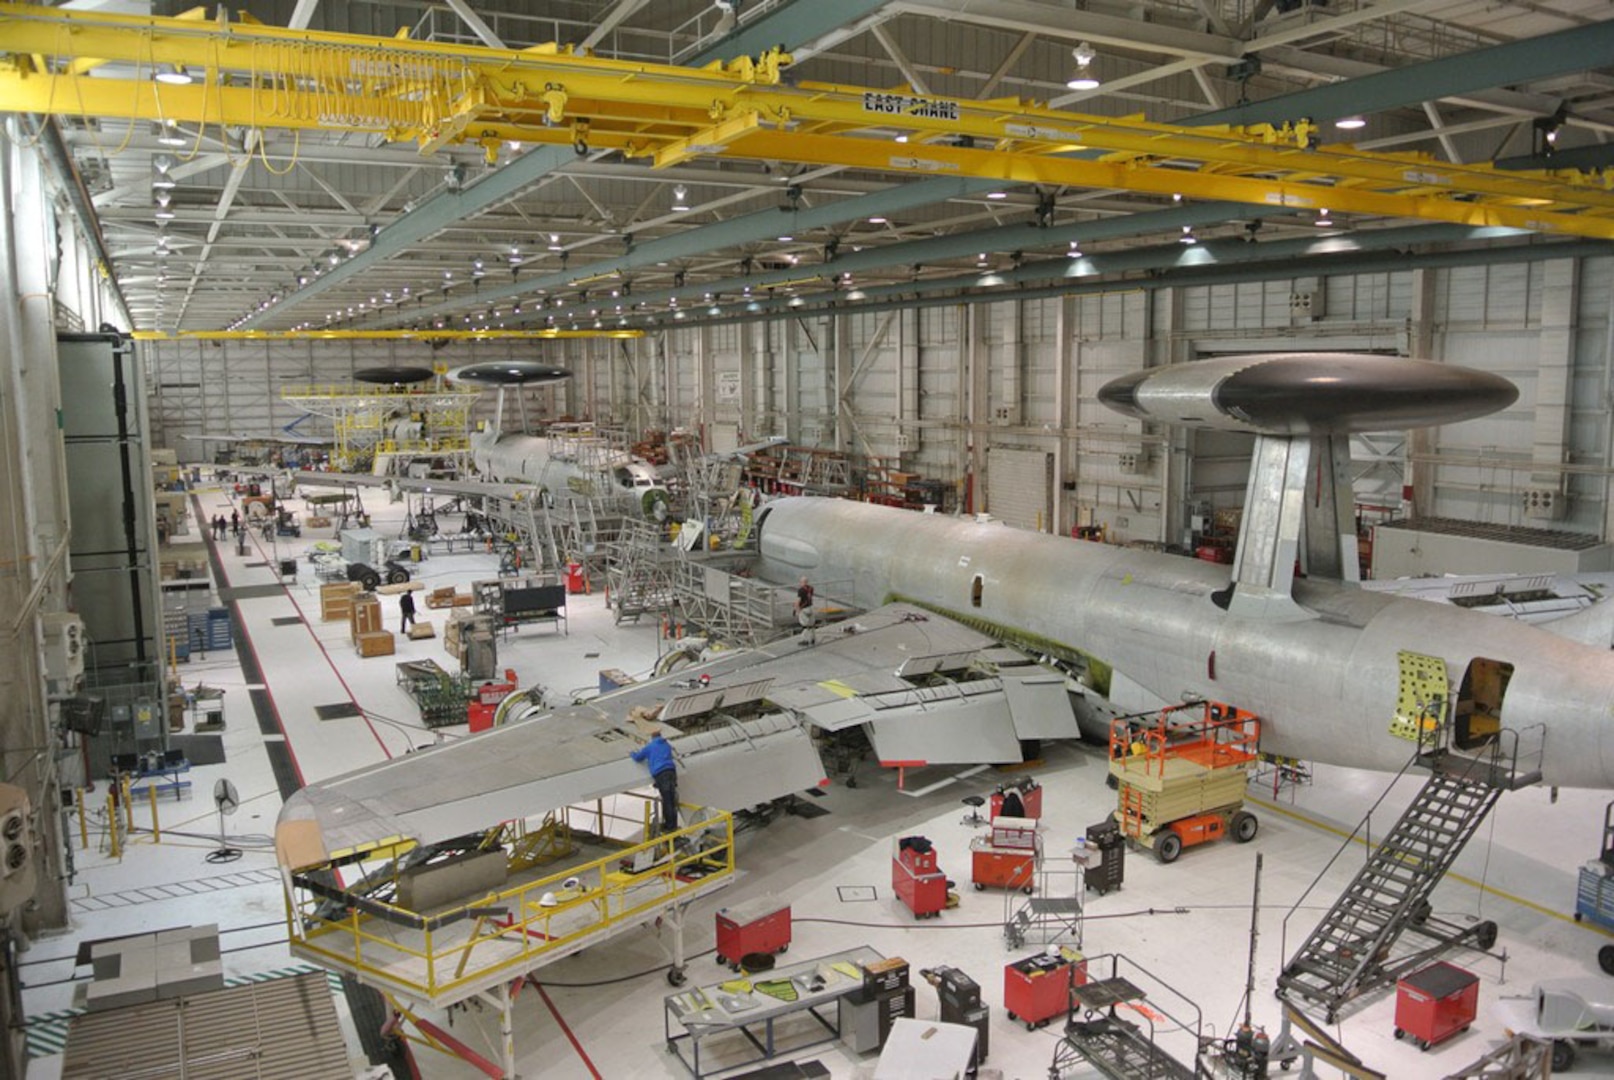 Workers at Tinker Air Force Base, Oklahoma, install critical 40/45 upgrades to E-3 AWACS aircraft during programmed depot maintenance at the Oklahoma City Air Logistics Complex. Defense Logistics Agency Energy recently awarded an energy saving performance contract to implement energy conservation measures at the OC-ALC.